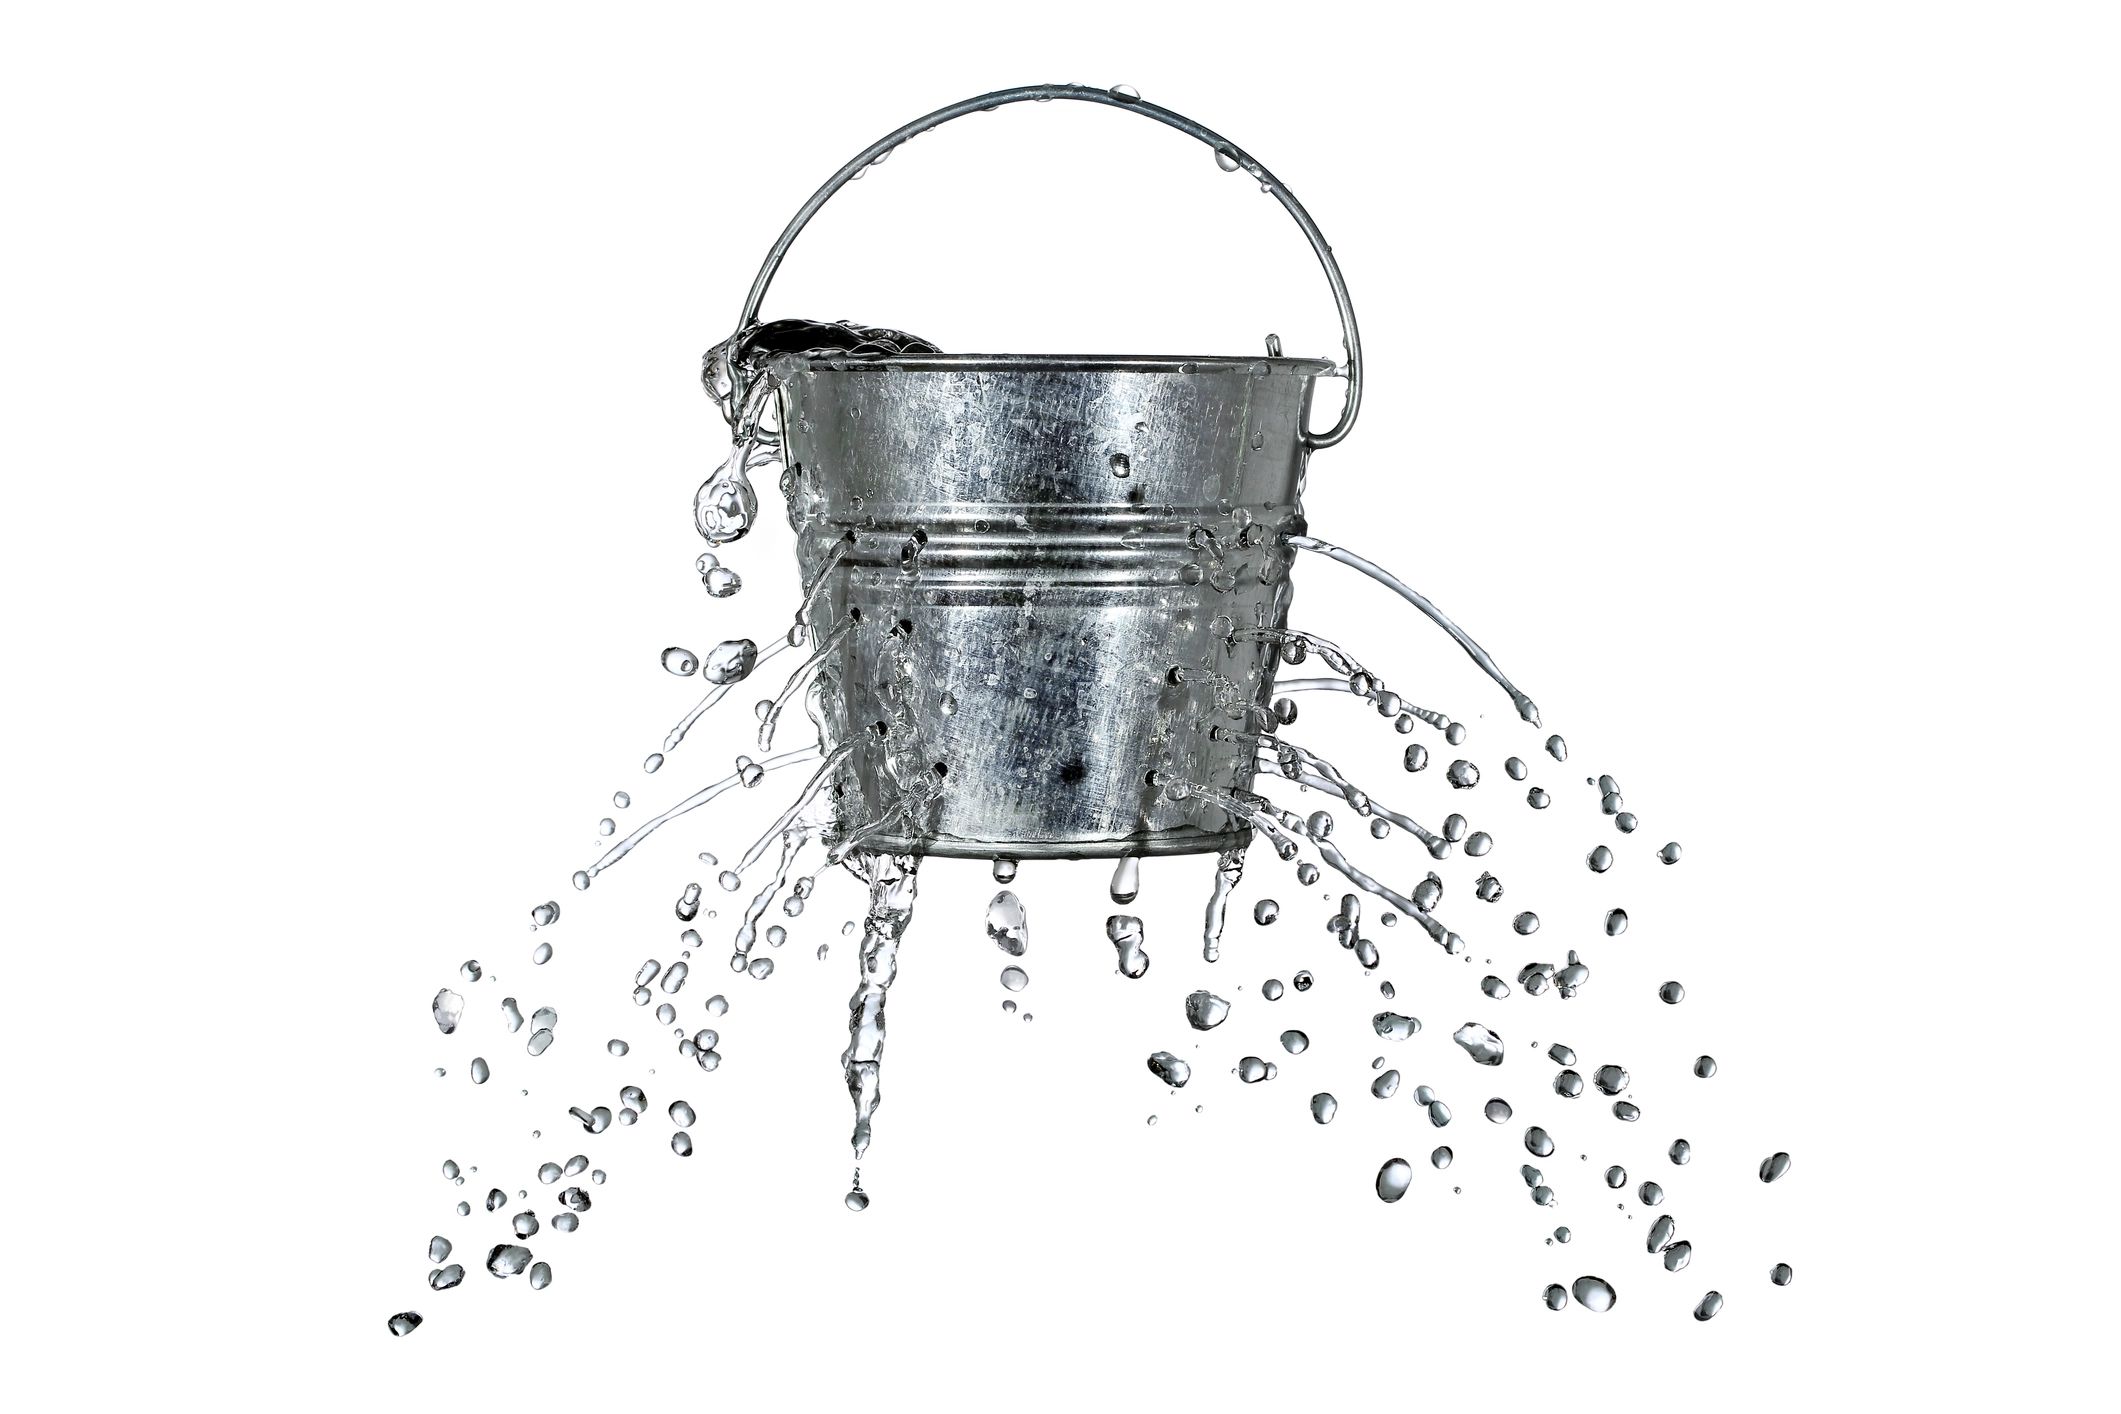 /how-to-eliminate-leaky-s3-buckets-without-writing-a-line-of-code-s9113u32 feature image